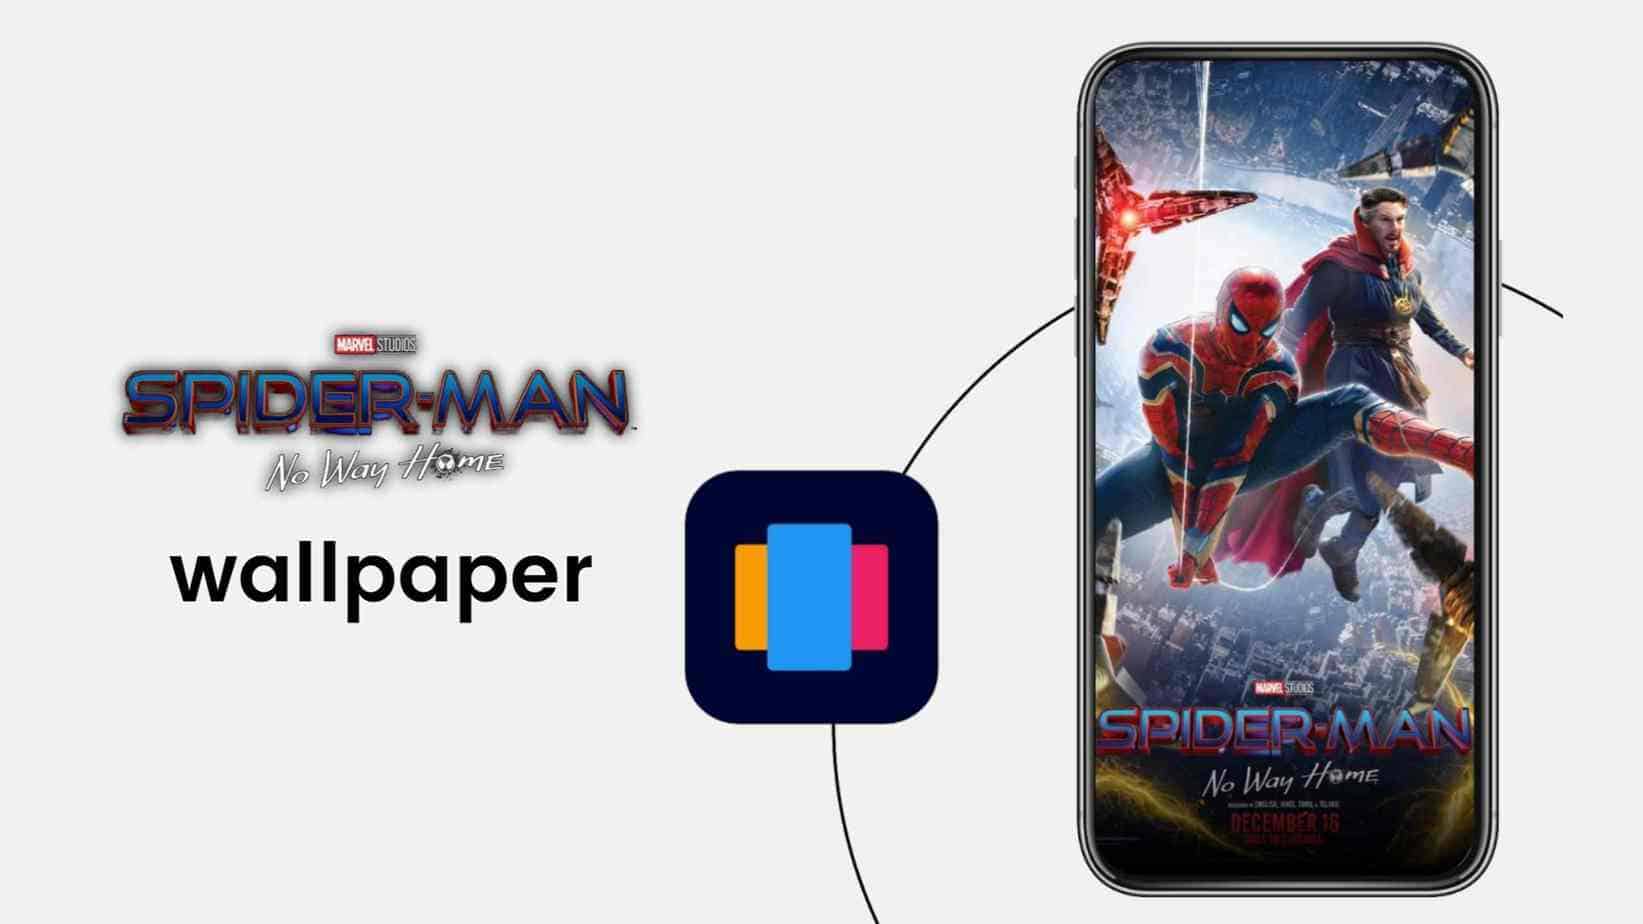 Spider-Man No Way home HD wallpaper download on your Smartphone